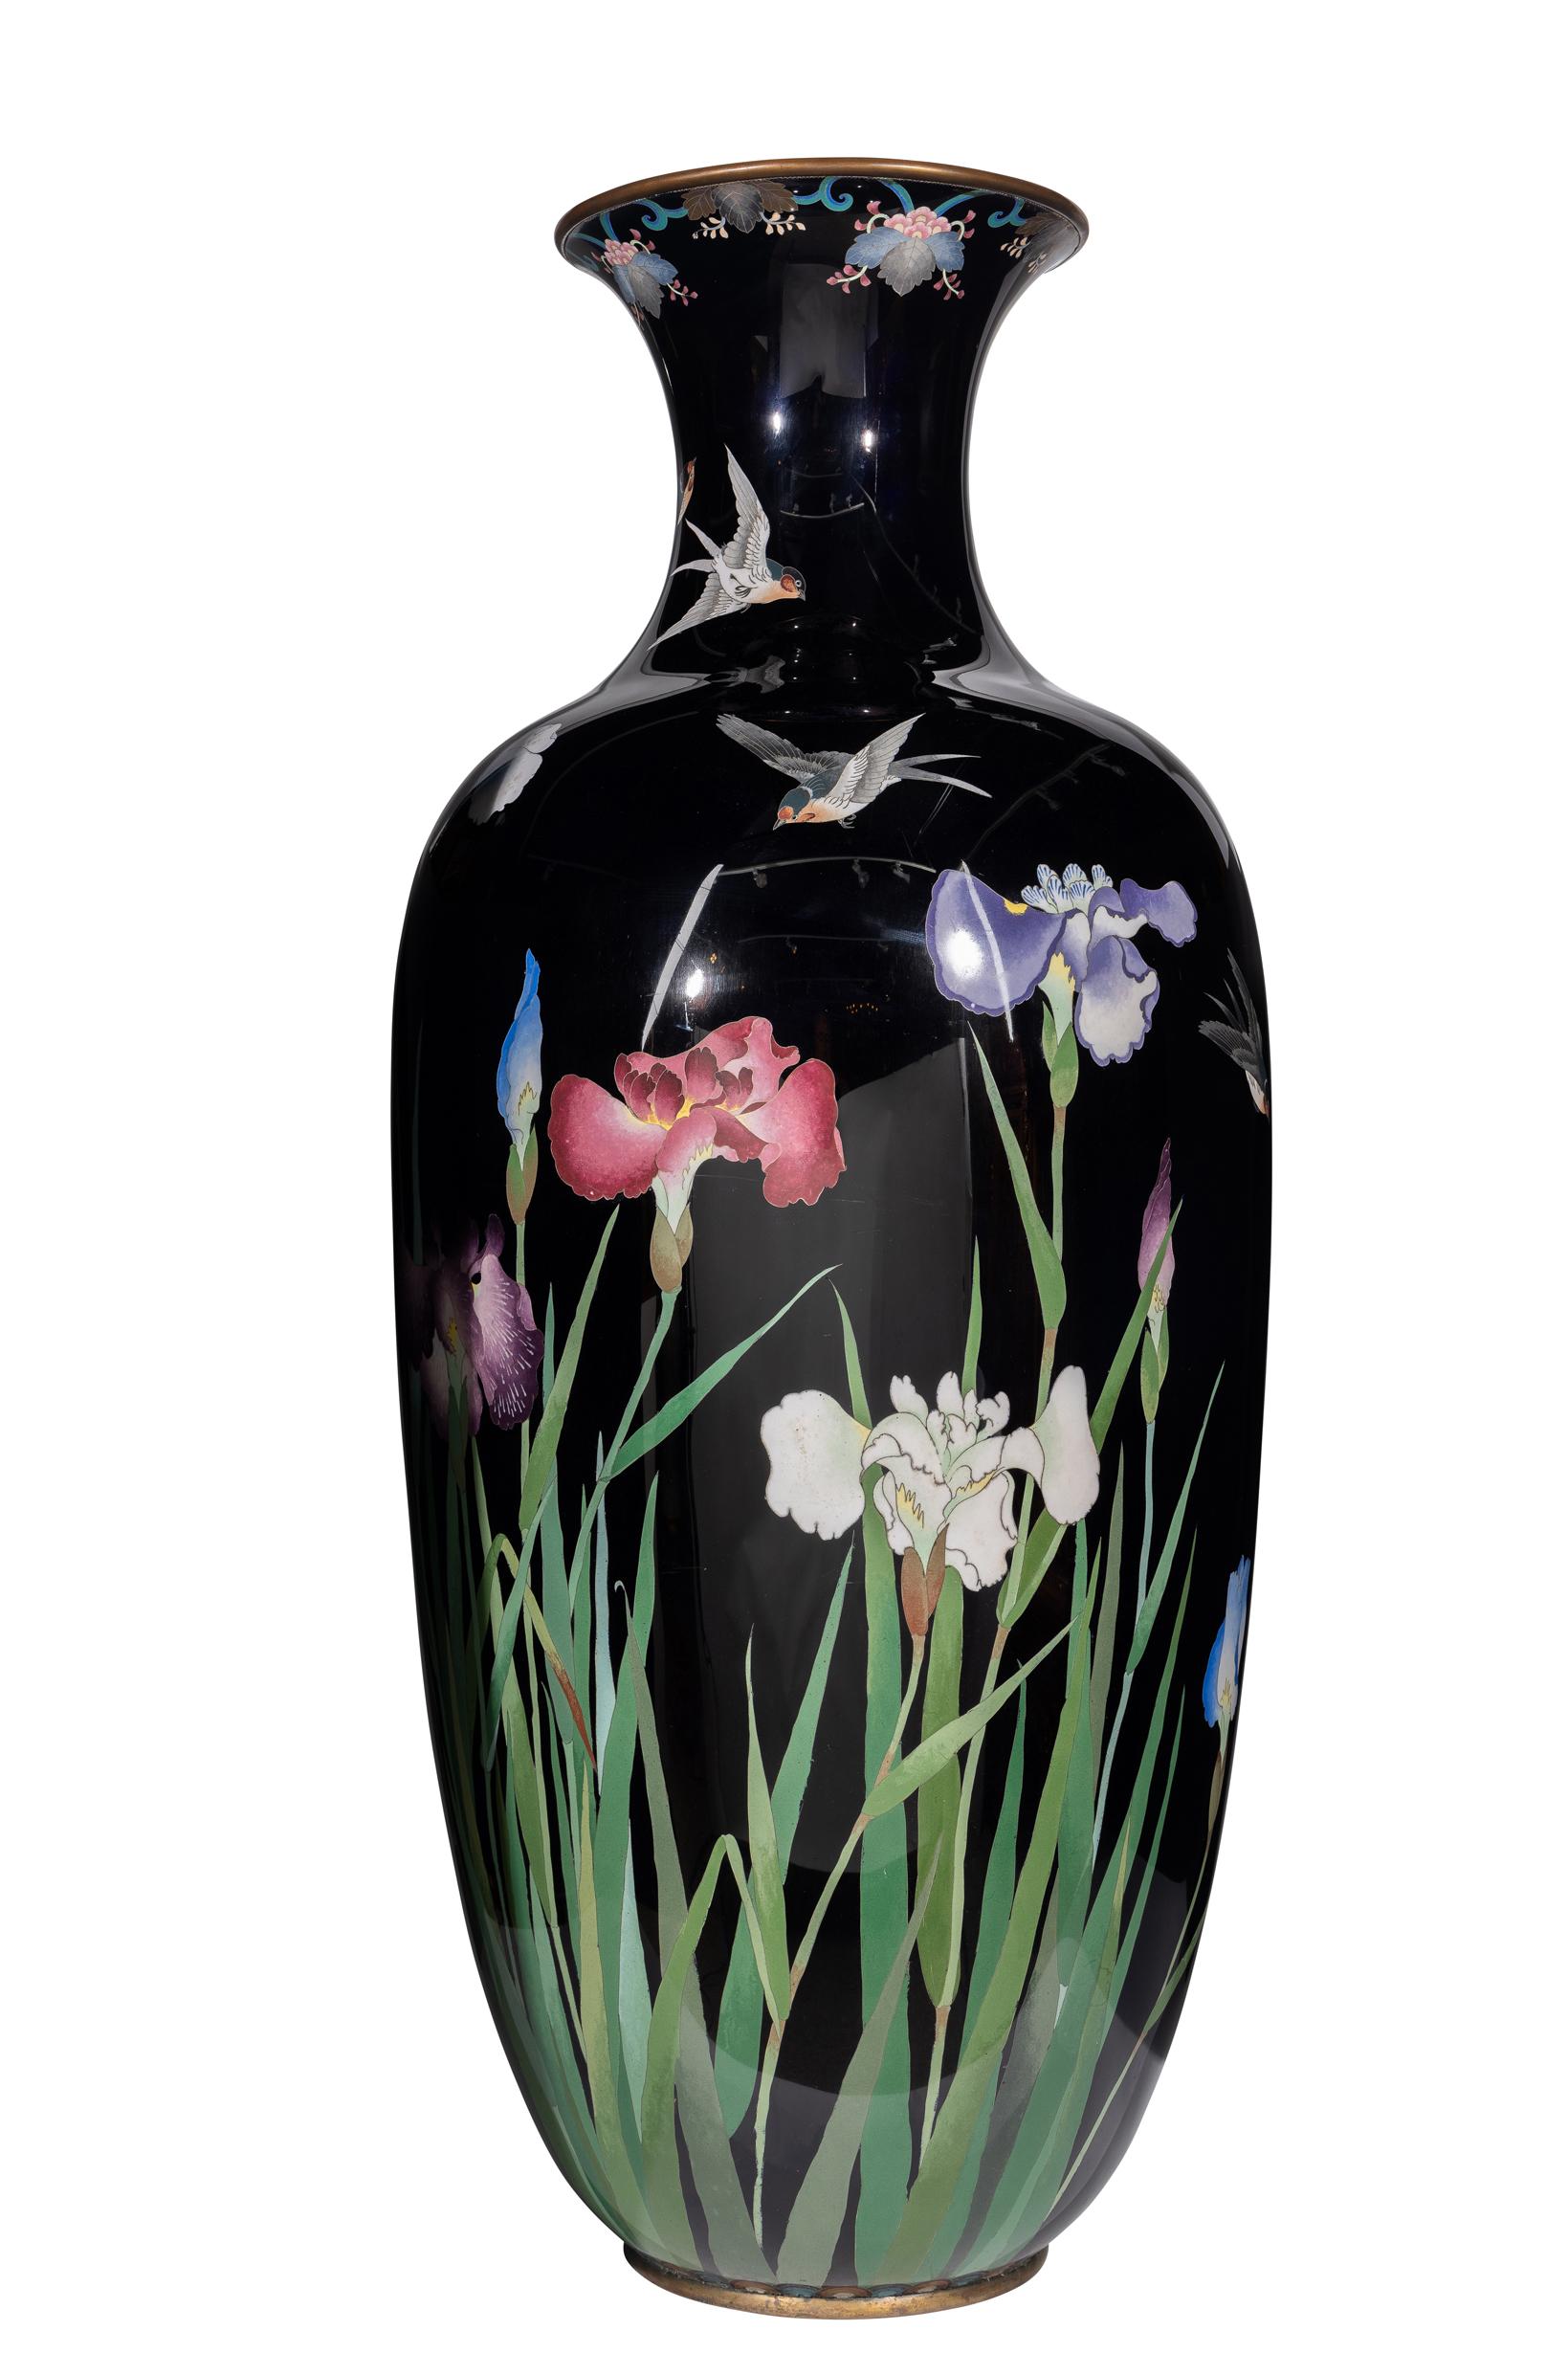 Palace-Sized Japanese Cloisonne Enamel Vase Adorned with Irises and Sparrows In Good Condition For Sale In New York, NY